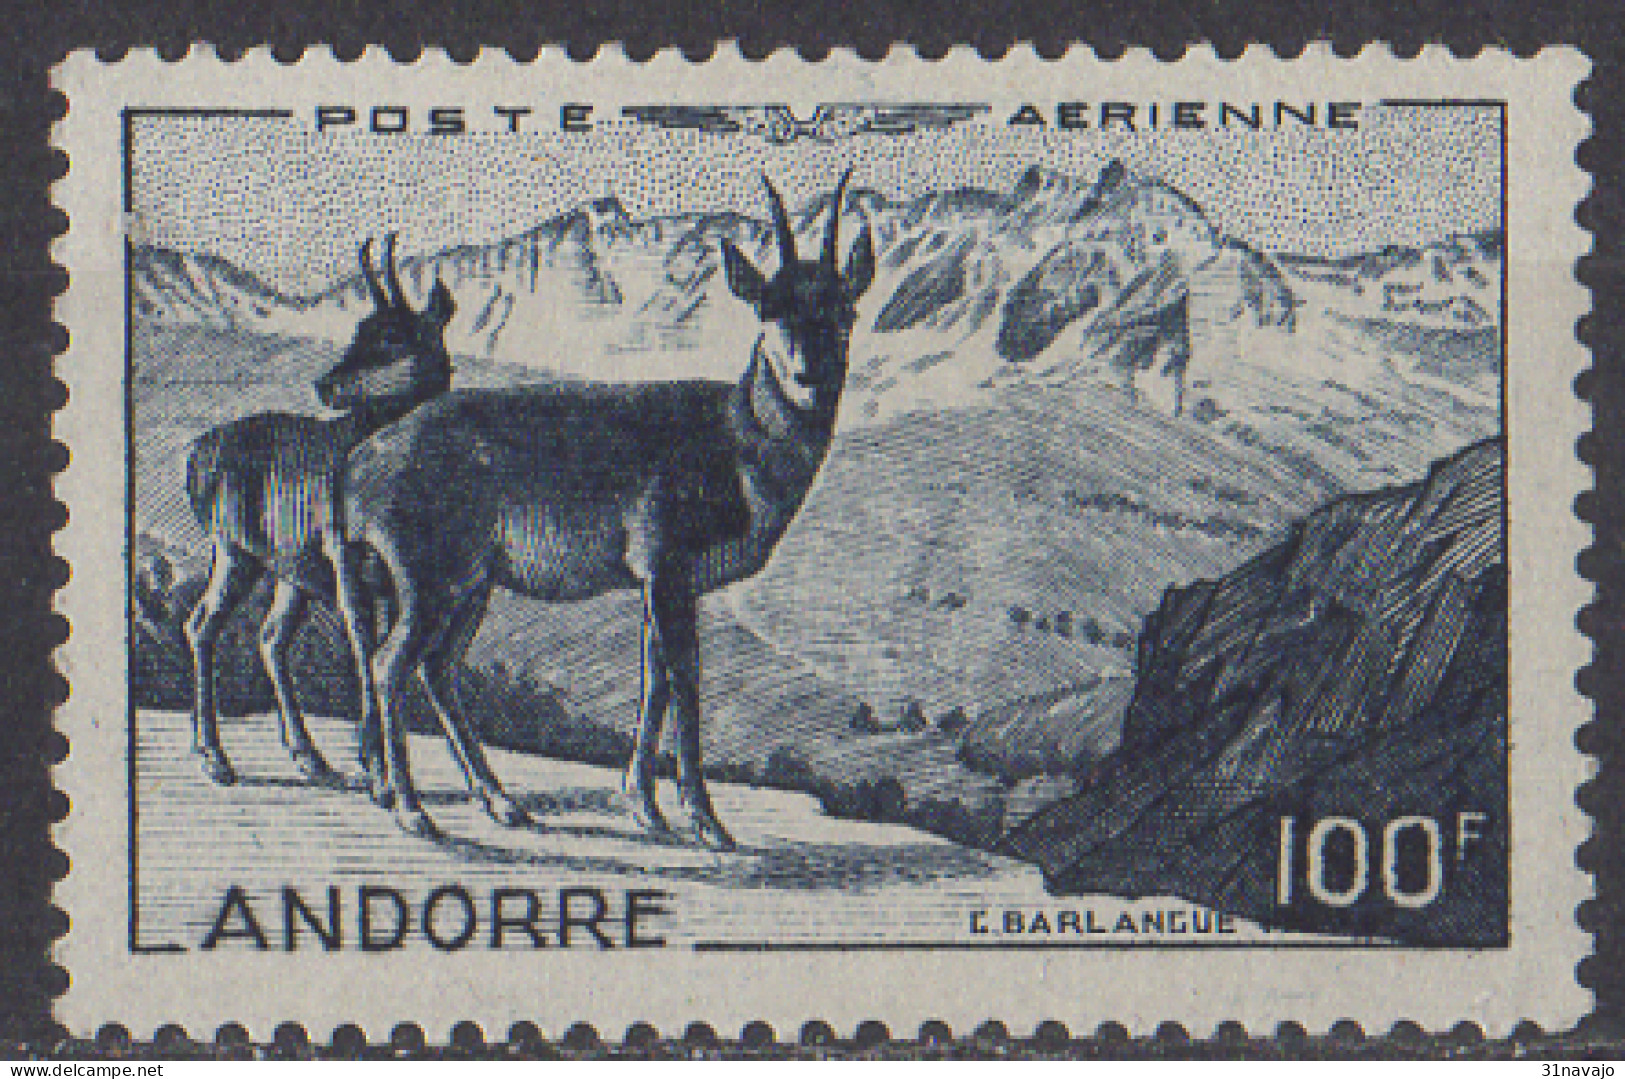 ANDORRE - Isards - Airmail